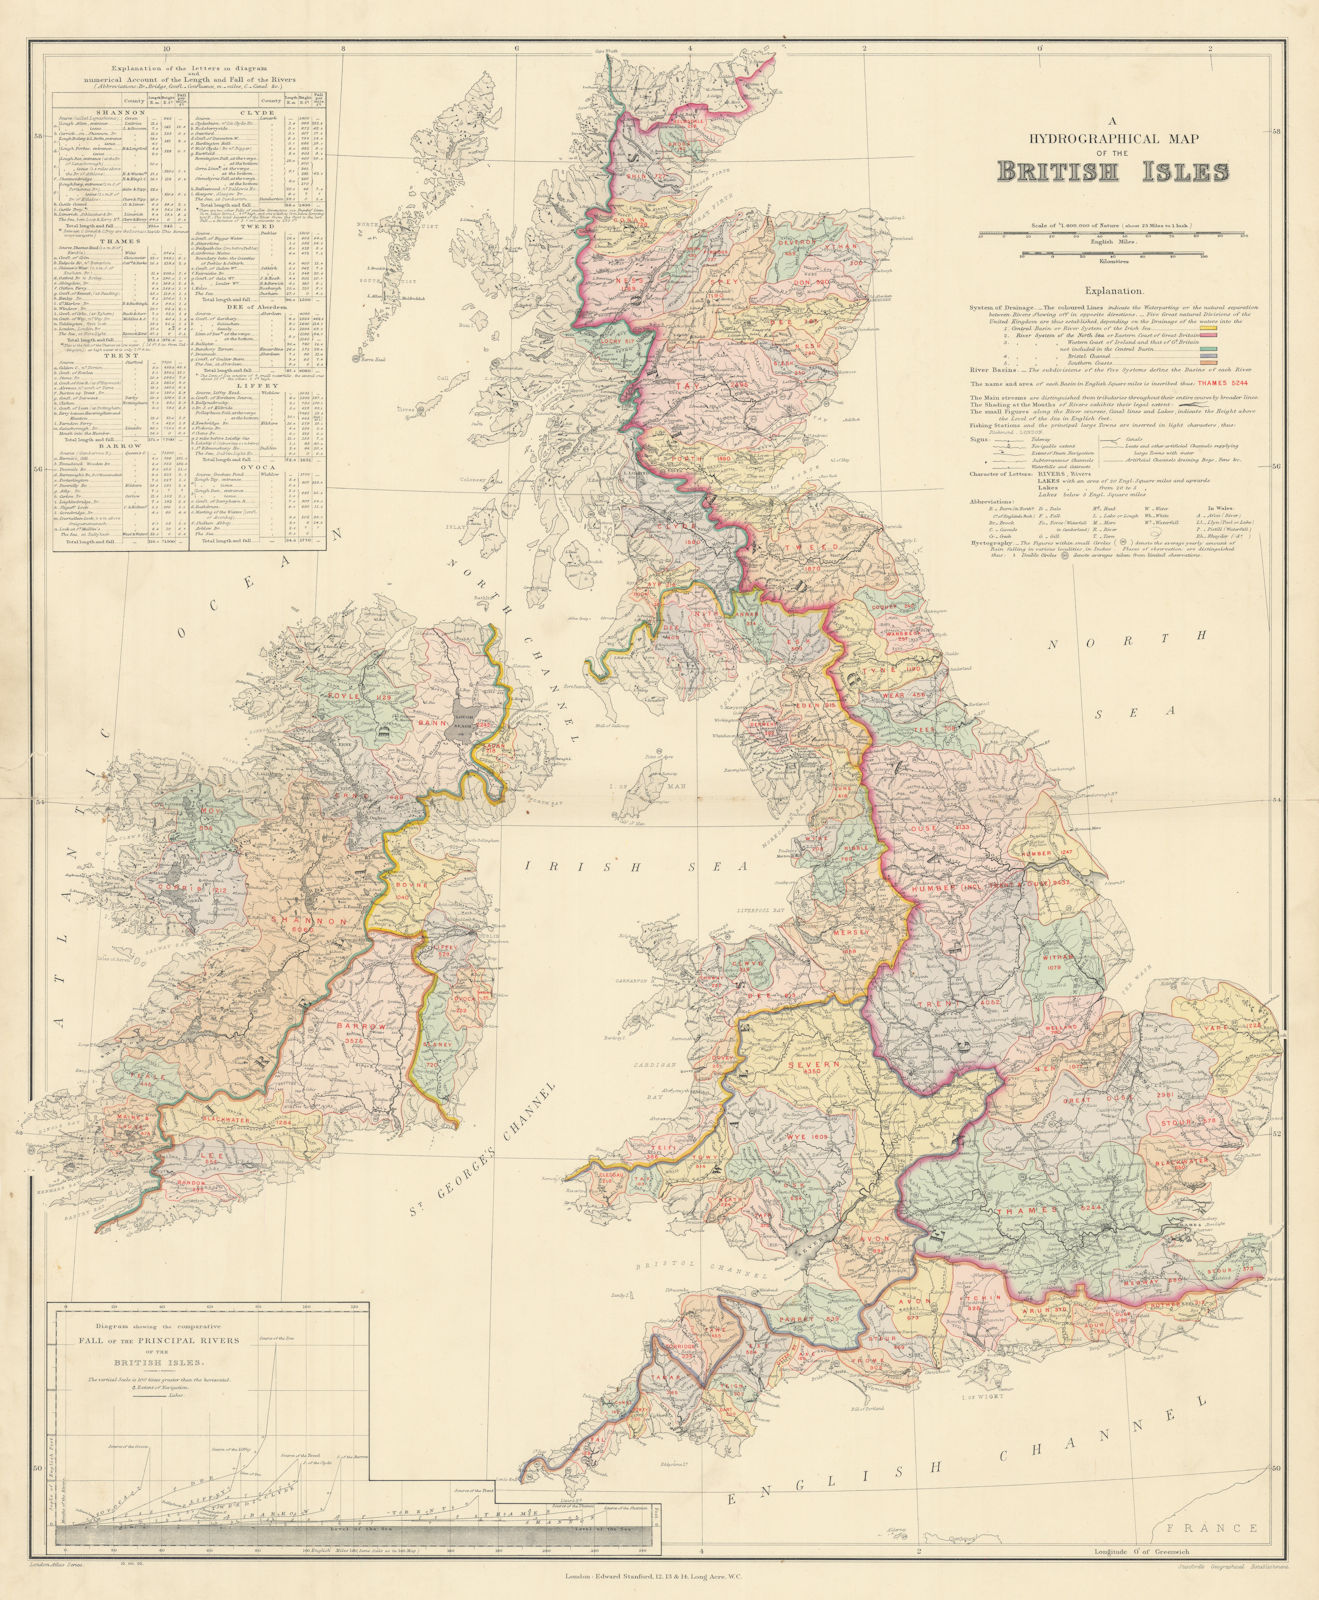 British Isles hydrographical. Watersheds River drainage basins STANFORD 1904 map